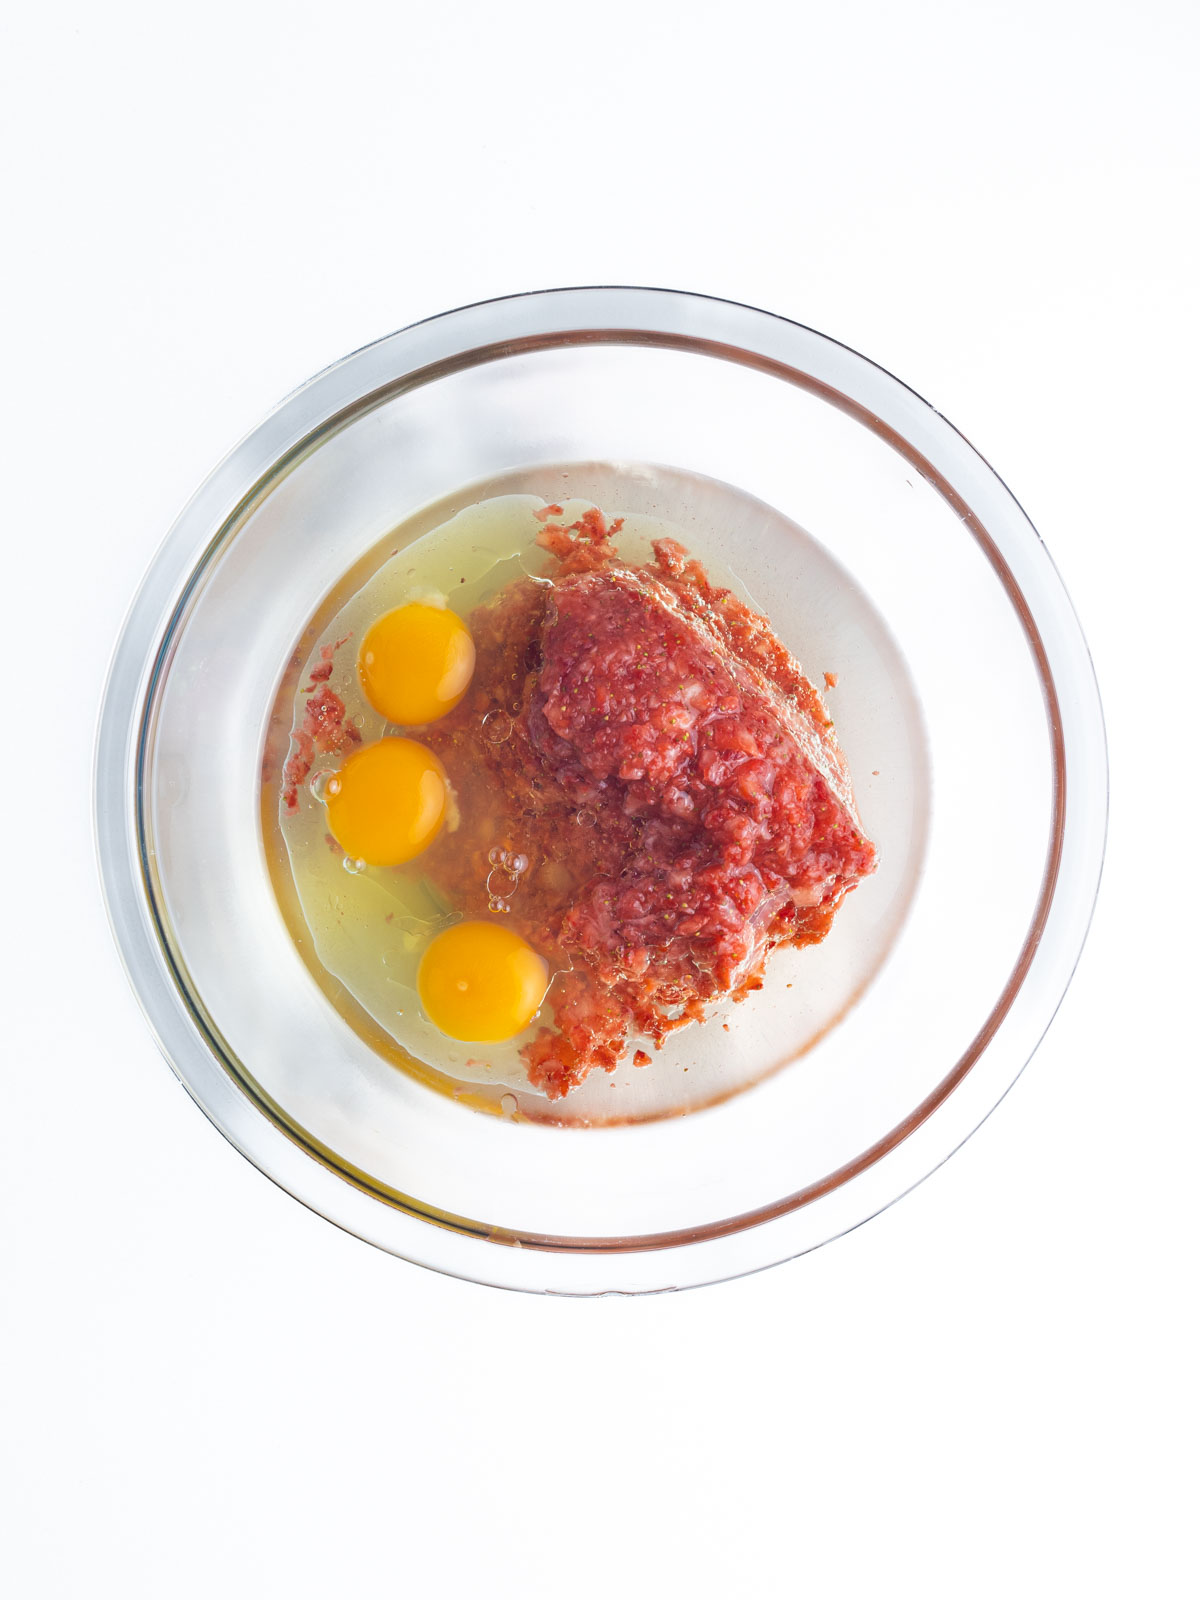 Strawberry puree, oil, and eggs in a clear glass mixing bowl on a white surface.